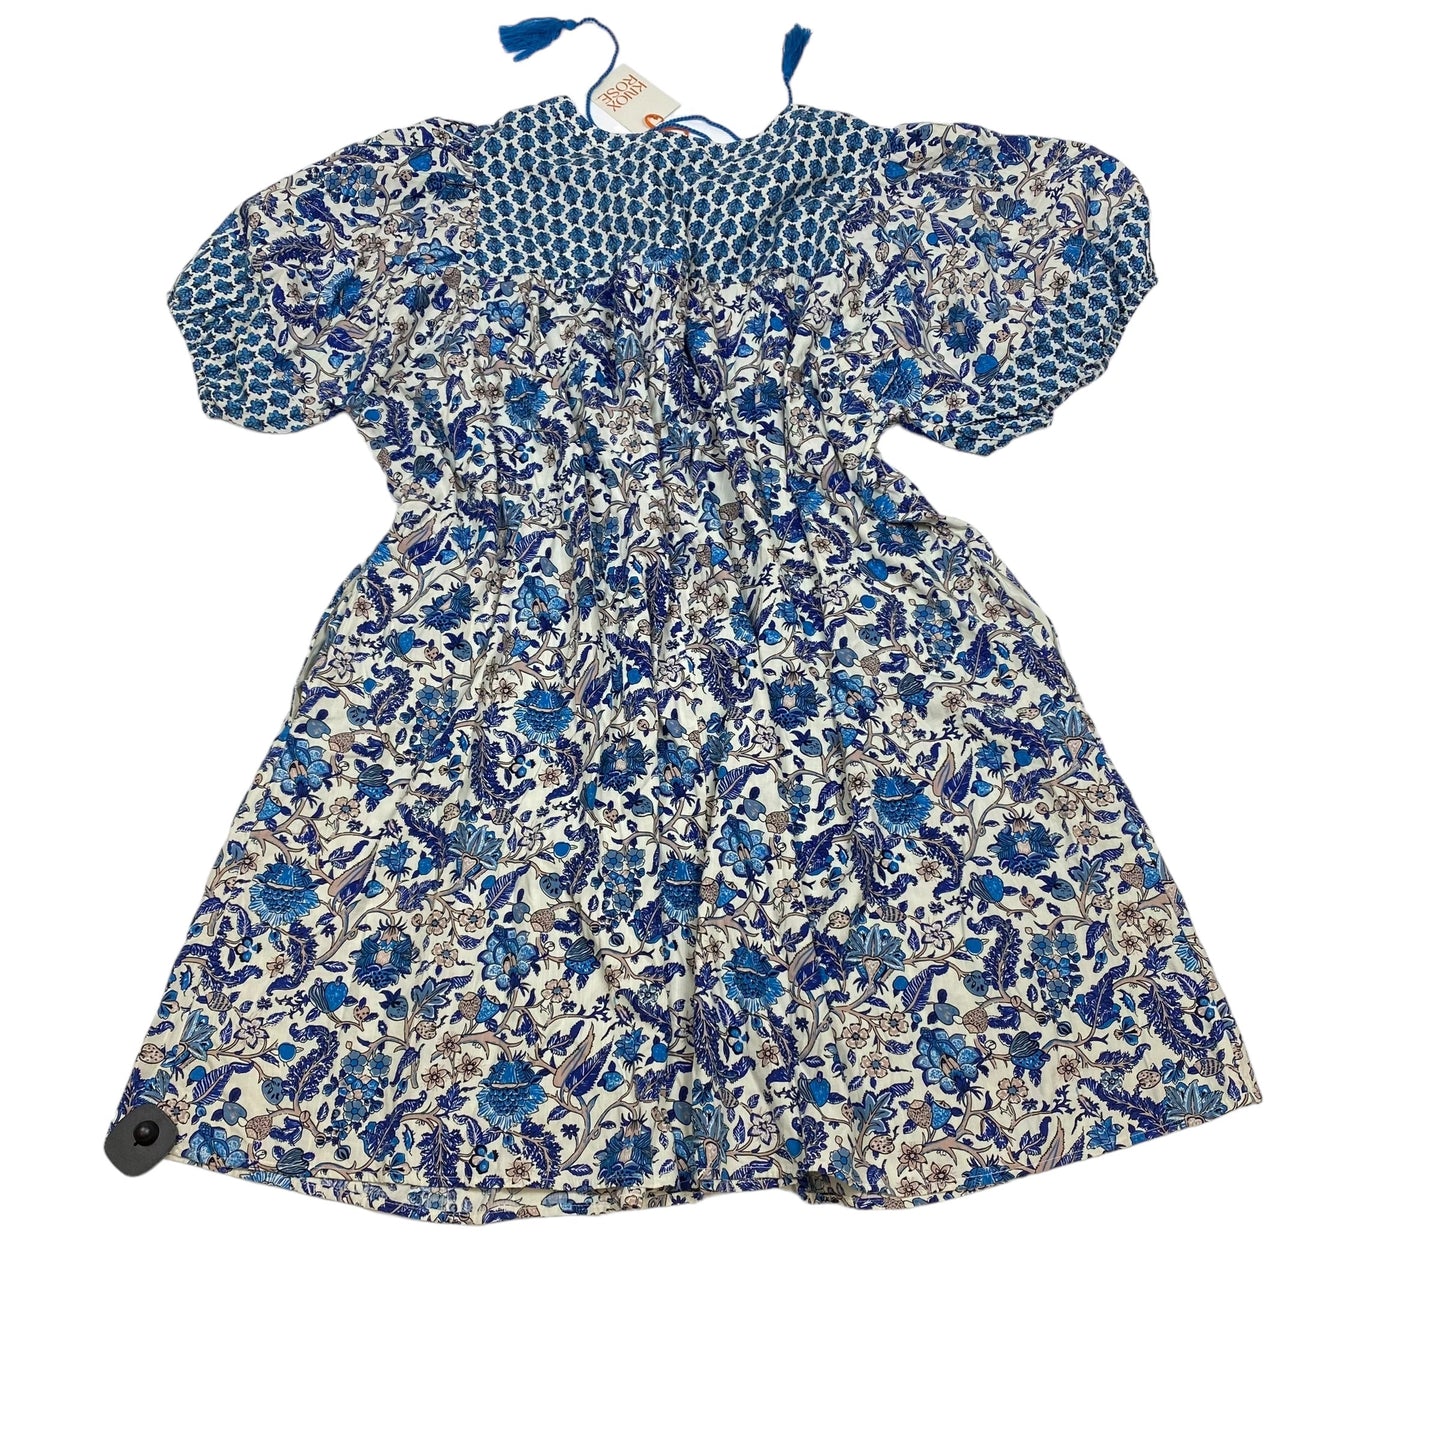 Blue Dress Casual Short Knox Rose, Size 4x